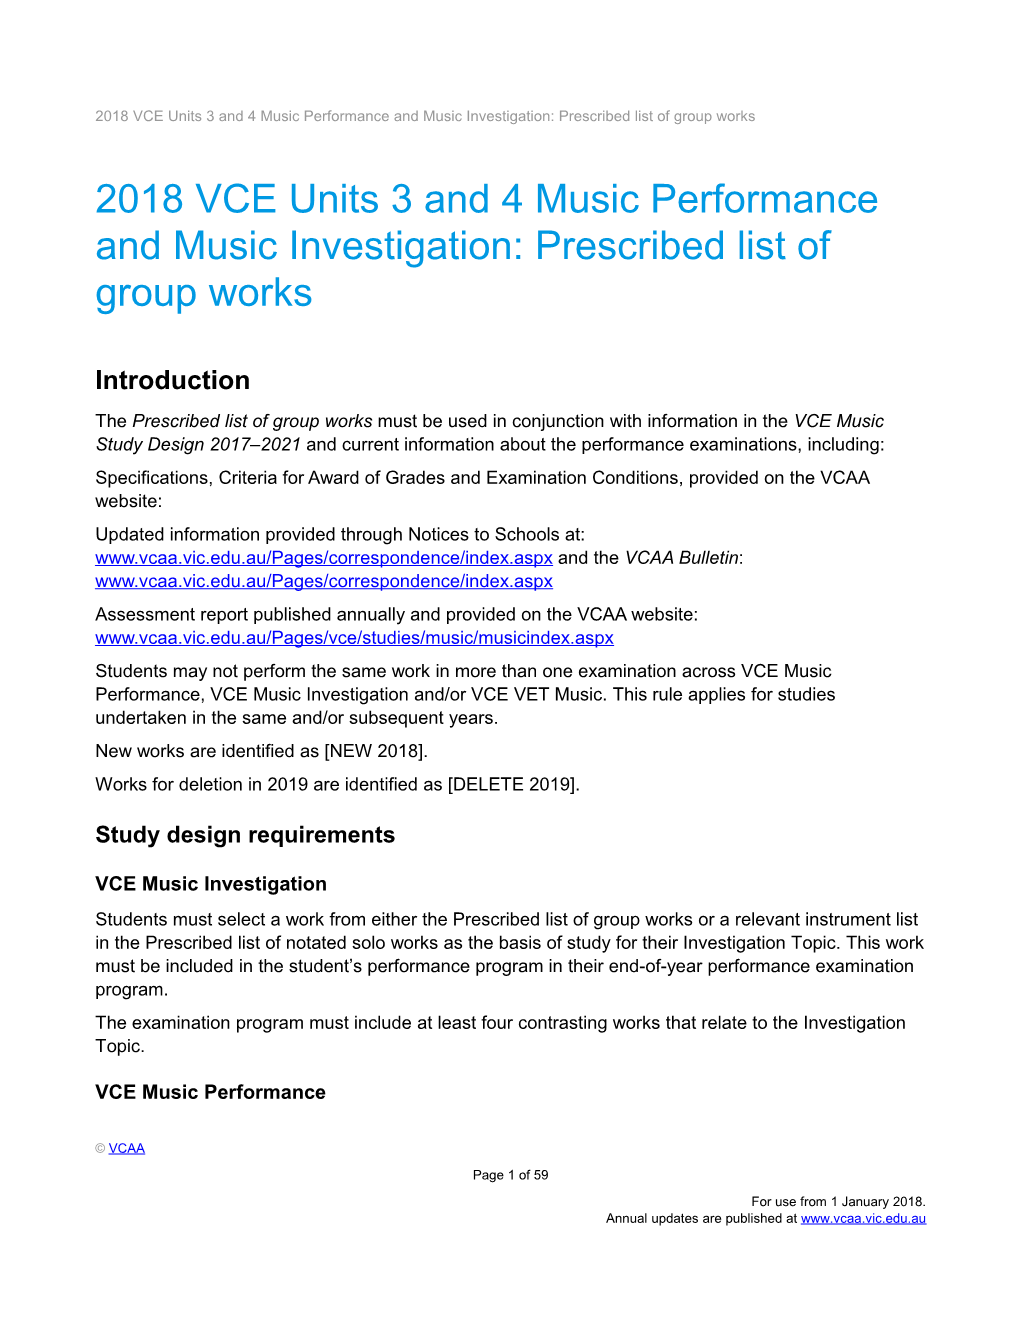 2018 VCE Units 3 and 4 Music Performance and Music Investigation: Prescribed List of Group Works